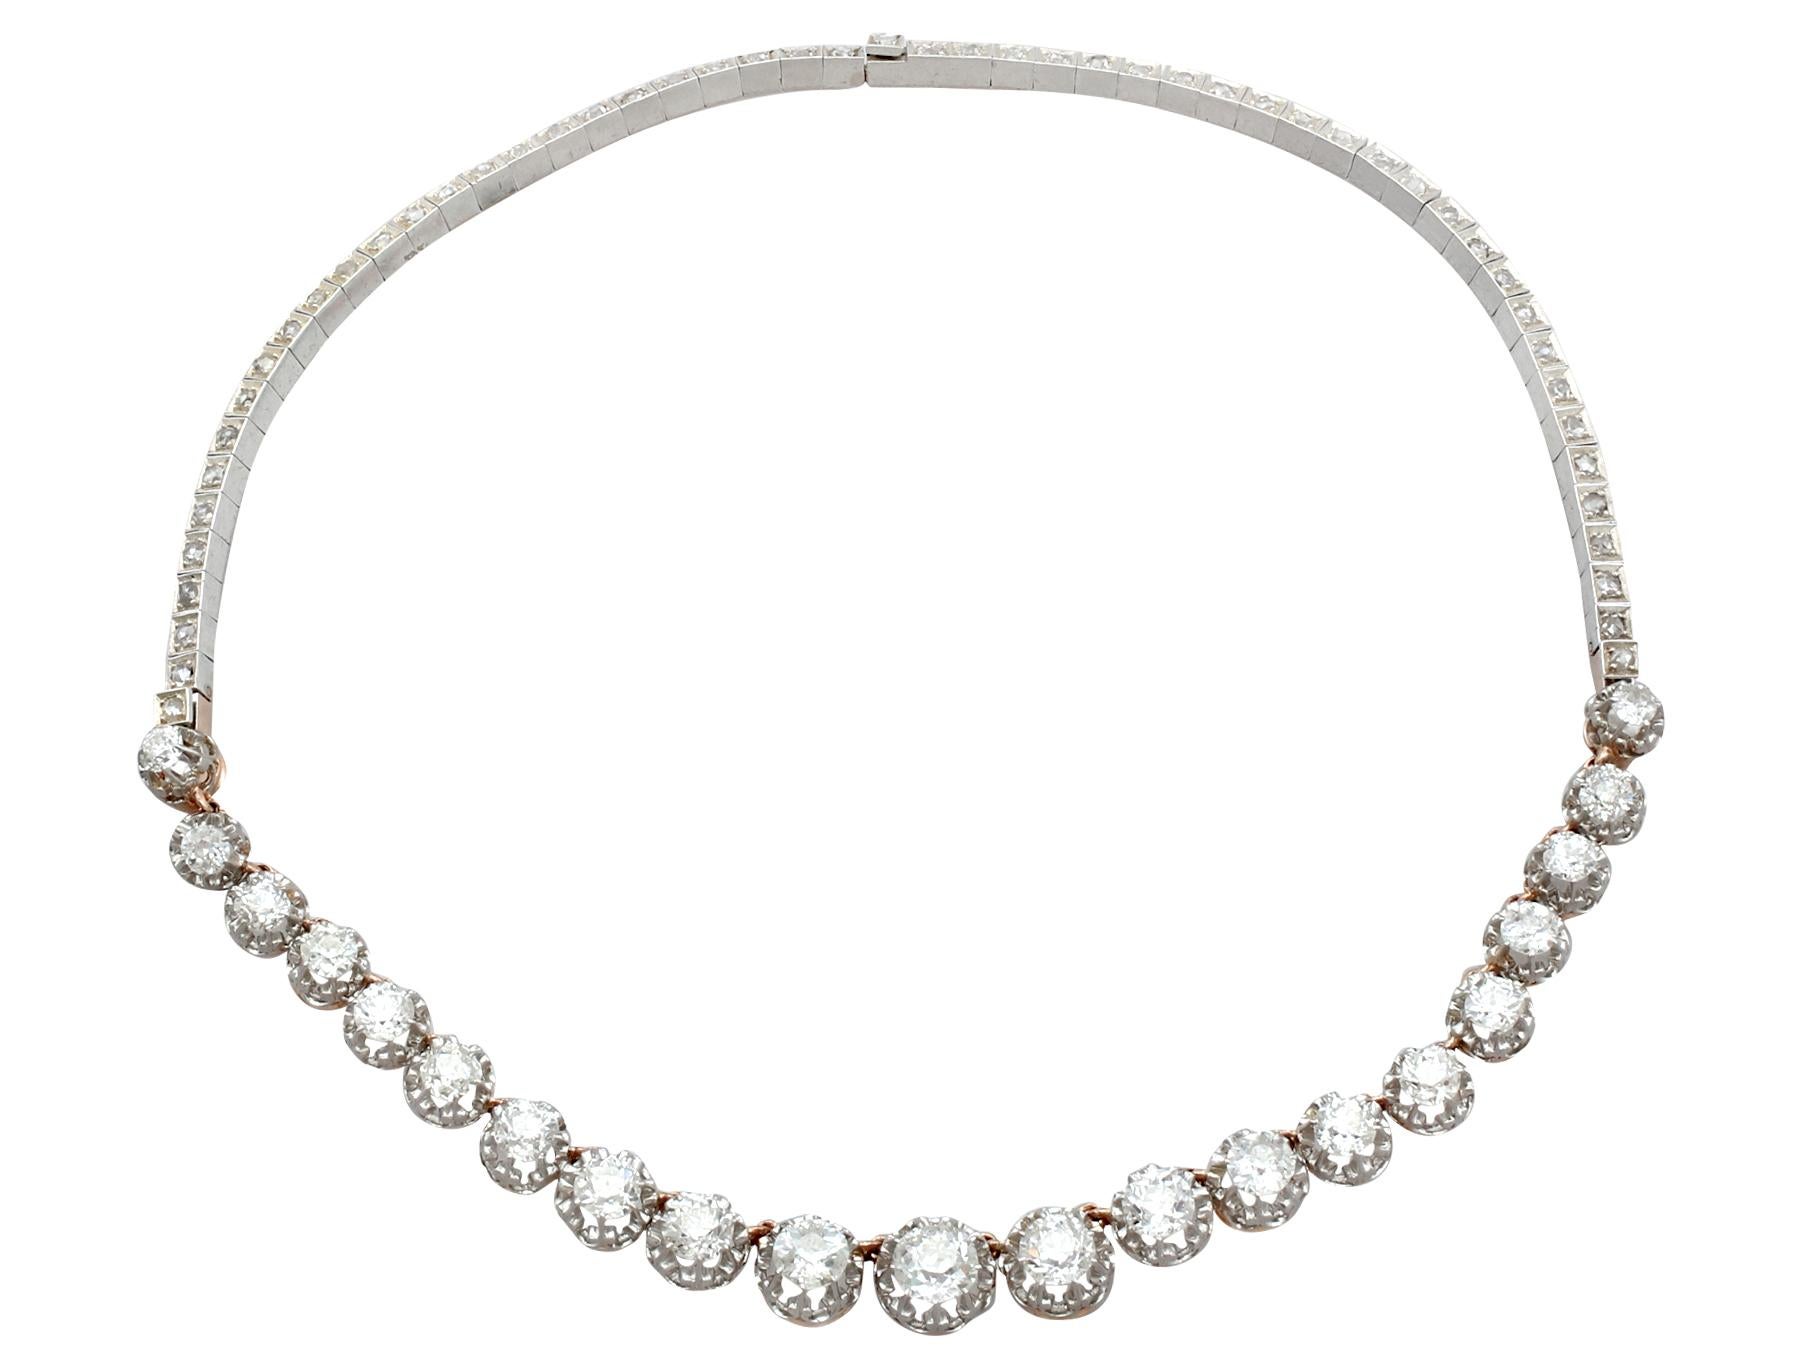 A stunning versatile antique French 11.12 carat diamond and 18 carat and 14 carat yellow gold, platinum and silver set necklace / bracelet; part of our diverse antique jewellery and estate jewelry collections.

This stunning, fine and impressive